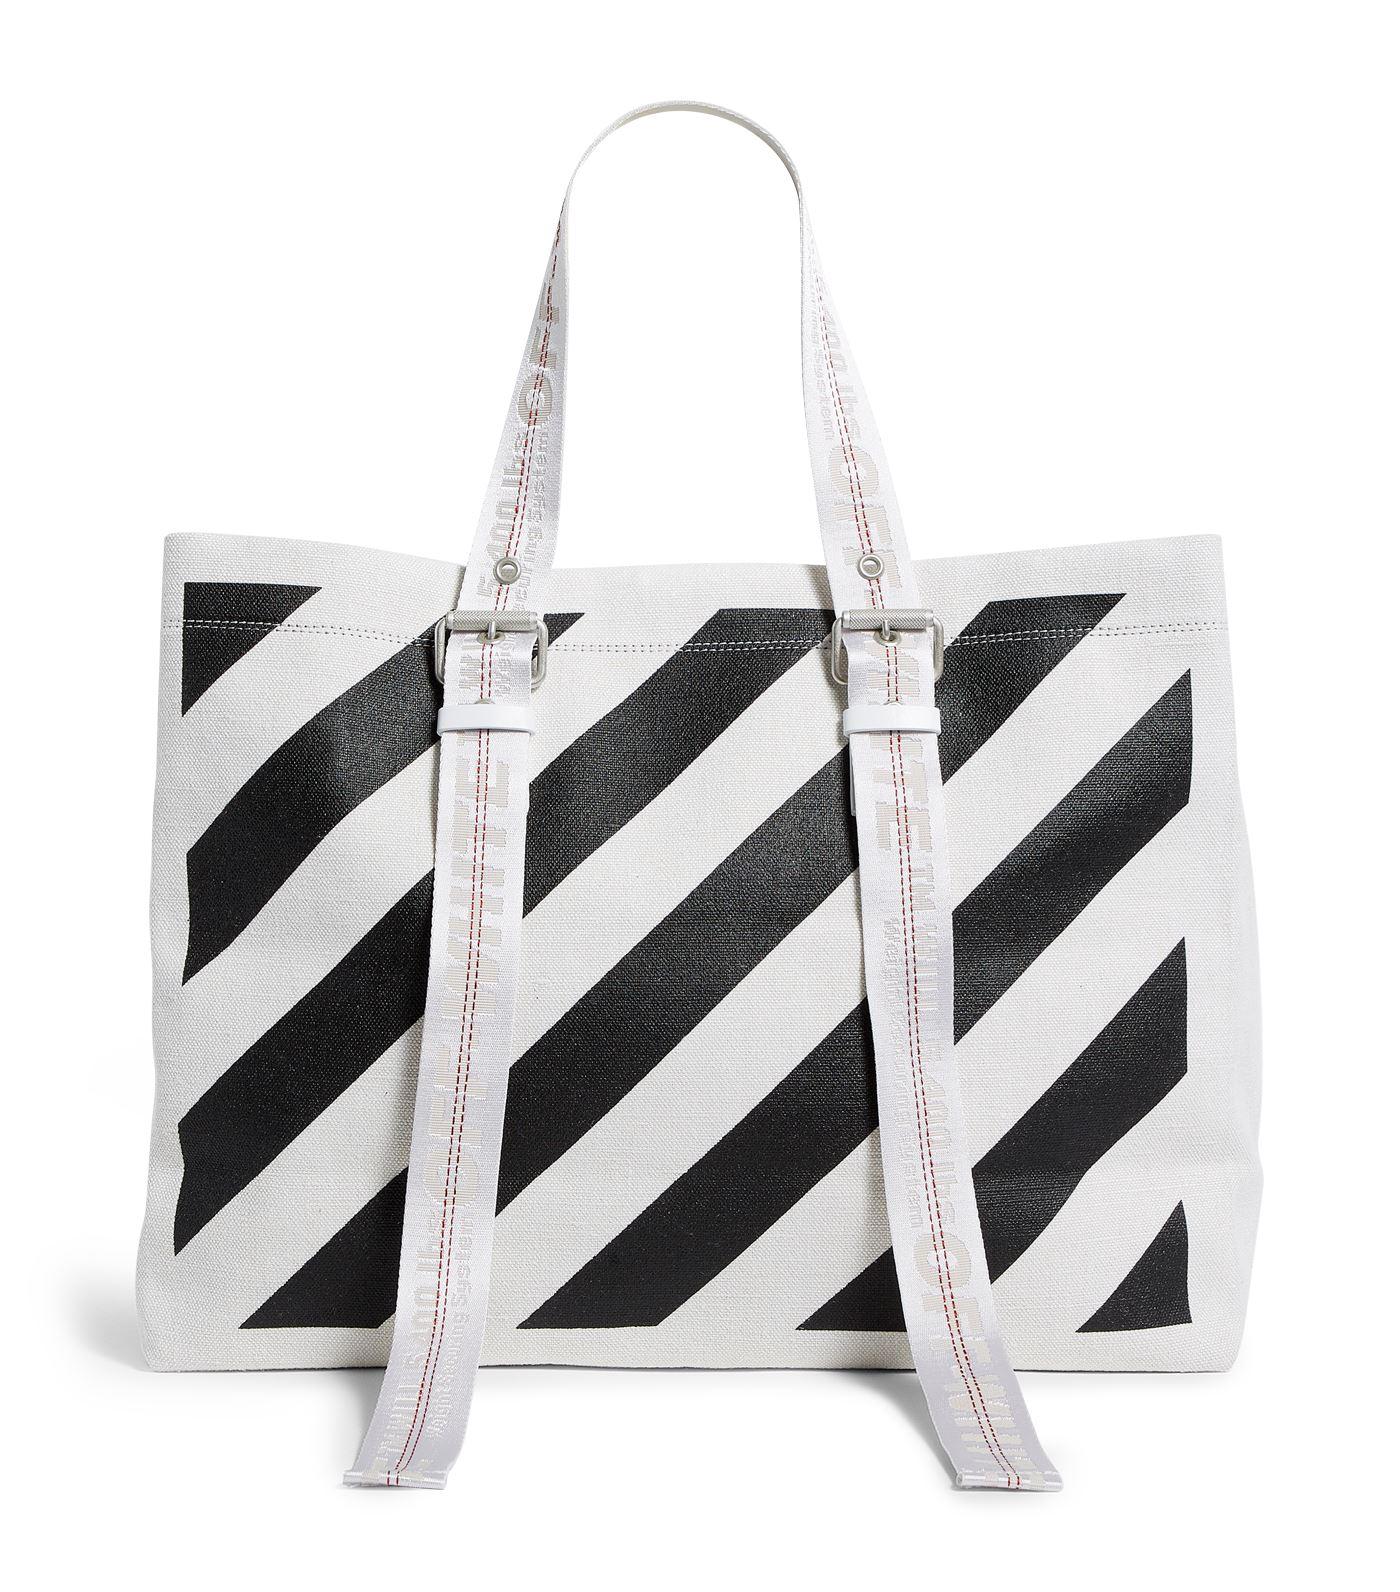 Ellers Med andre band Normalisering Off-White c/o Virgil Abloh Canvas Diagonal Print Tote in White - Lyst